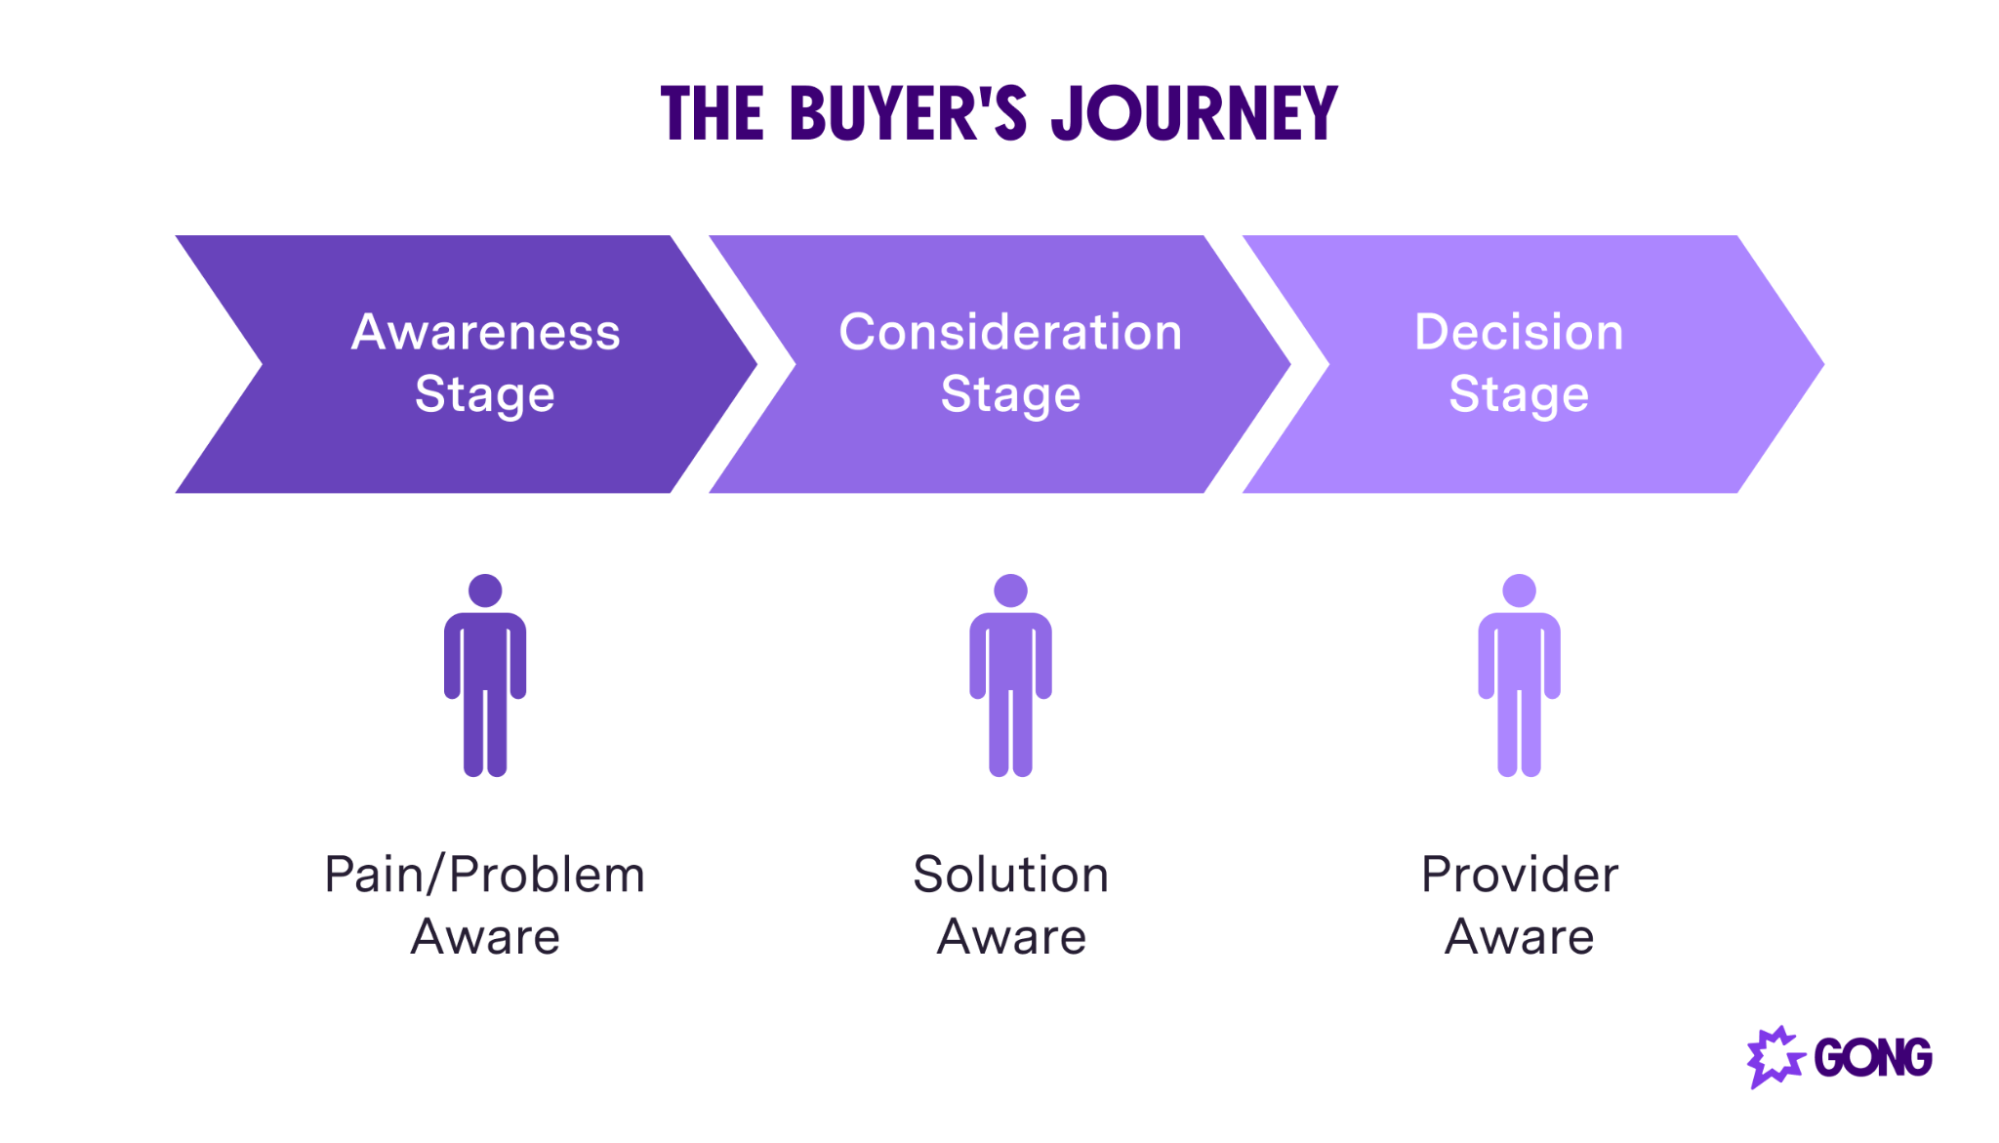 Each stage of the buyer's journey